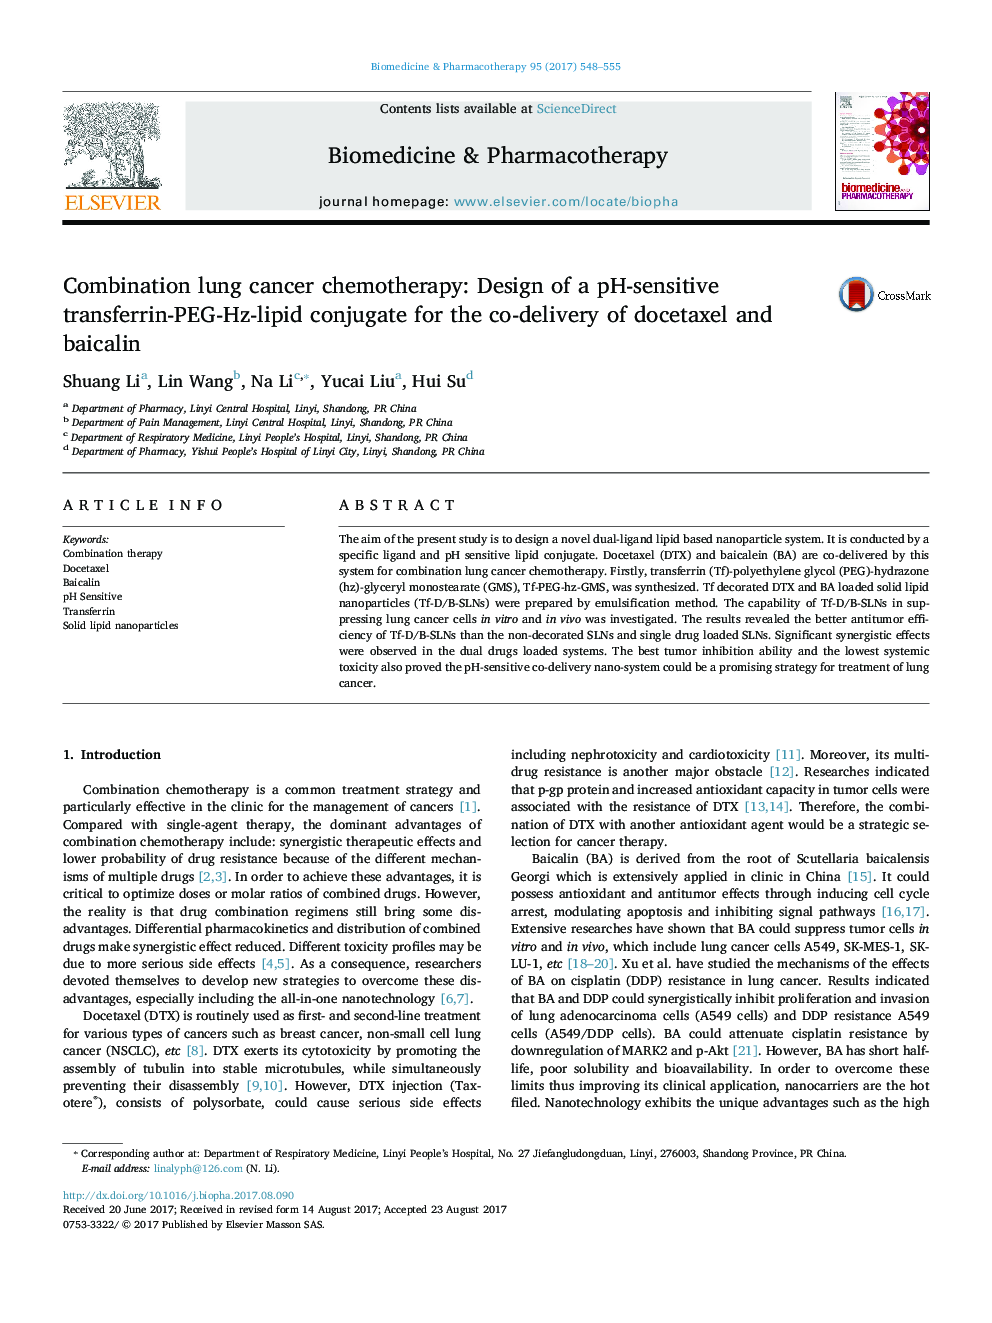 Combination lung cancer chemotherapy: Design of a pH-sensitive transferrin-PEG-Hz-lipid conjugate for the co-delivery of docetaxel and baicalin